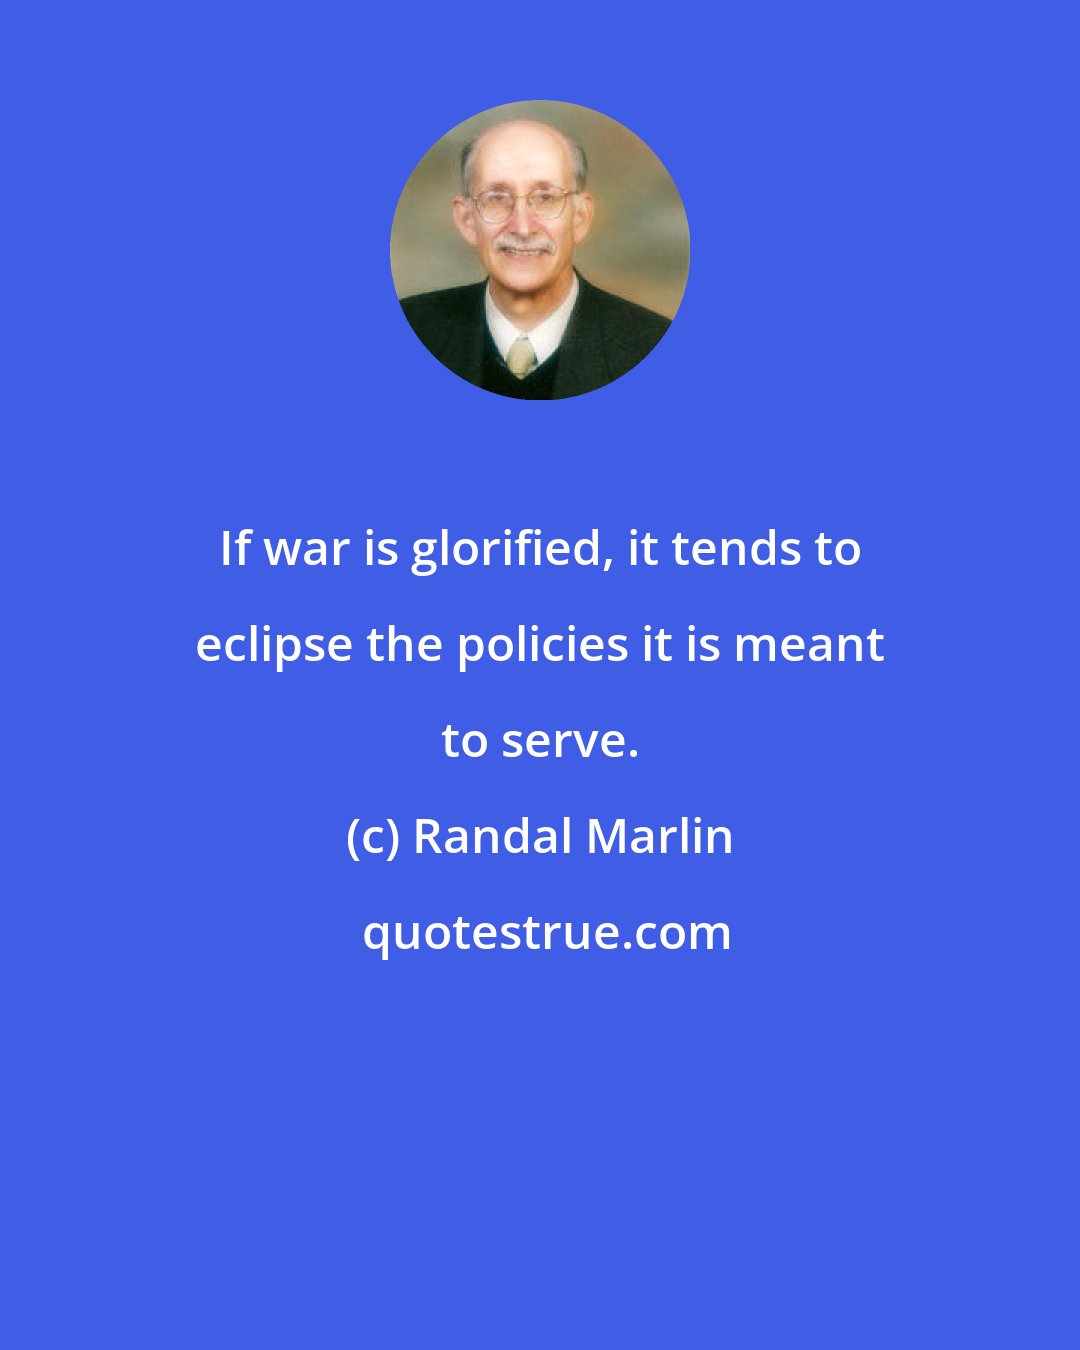 Randal Marlin: If war is glorified, it tends to eclipse the policies it is meant to serve.